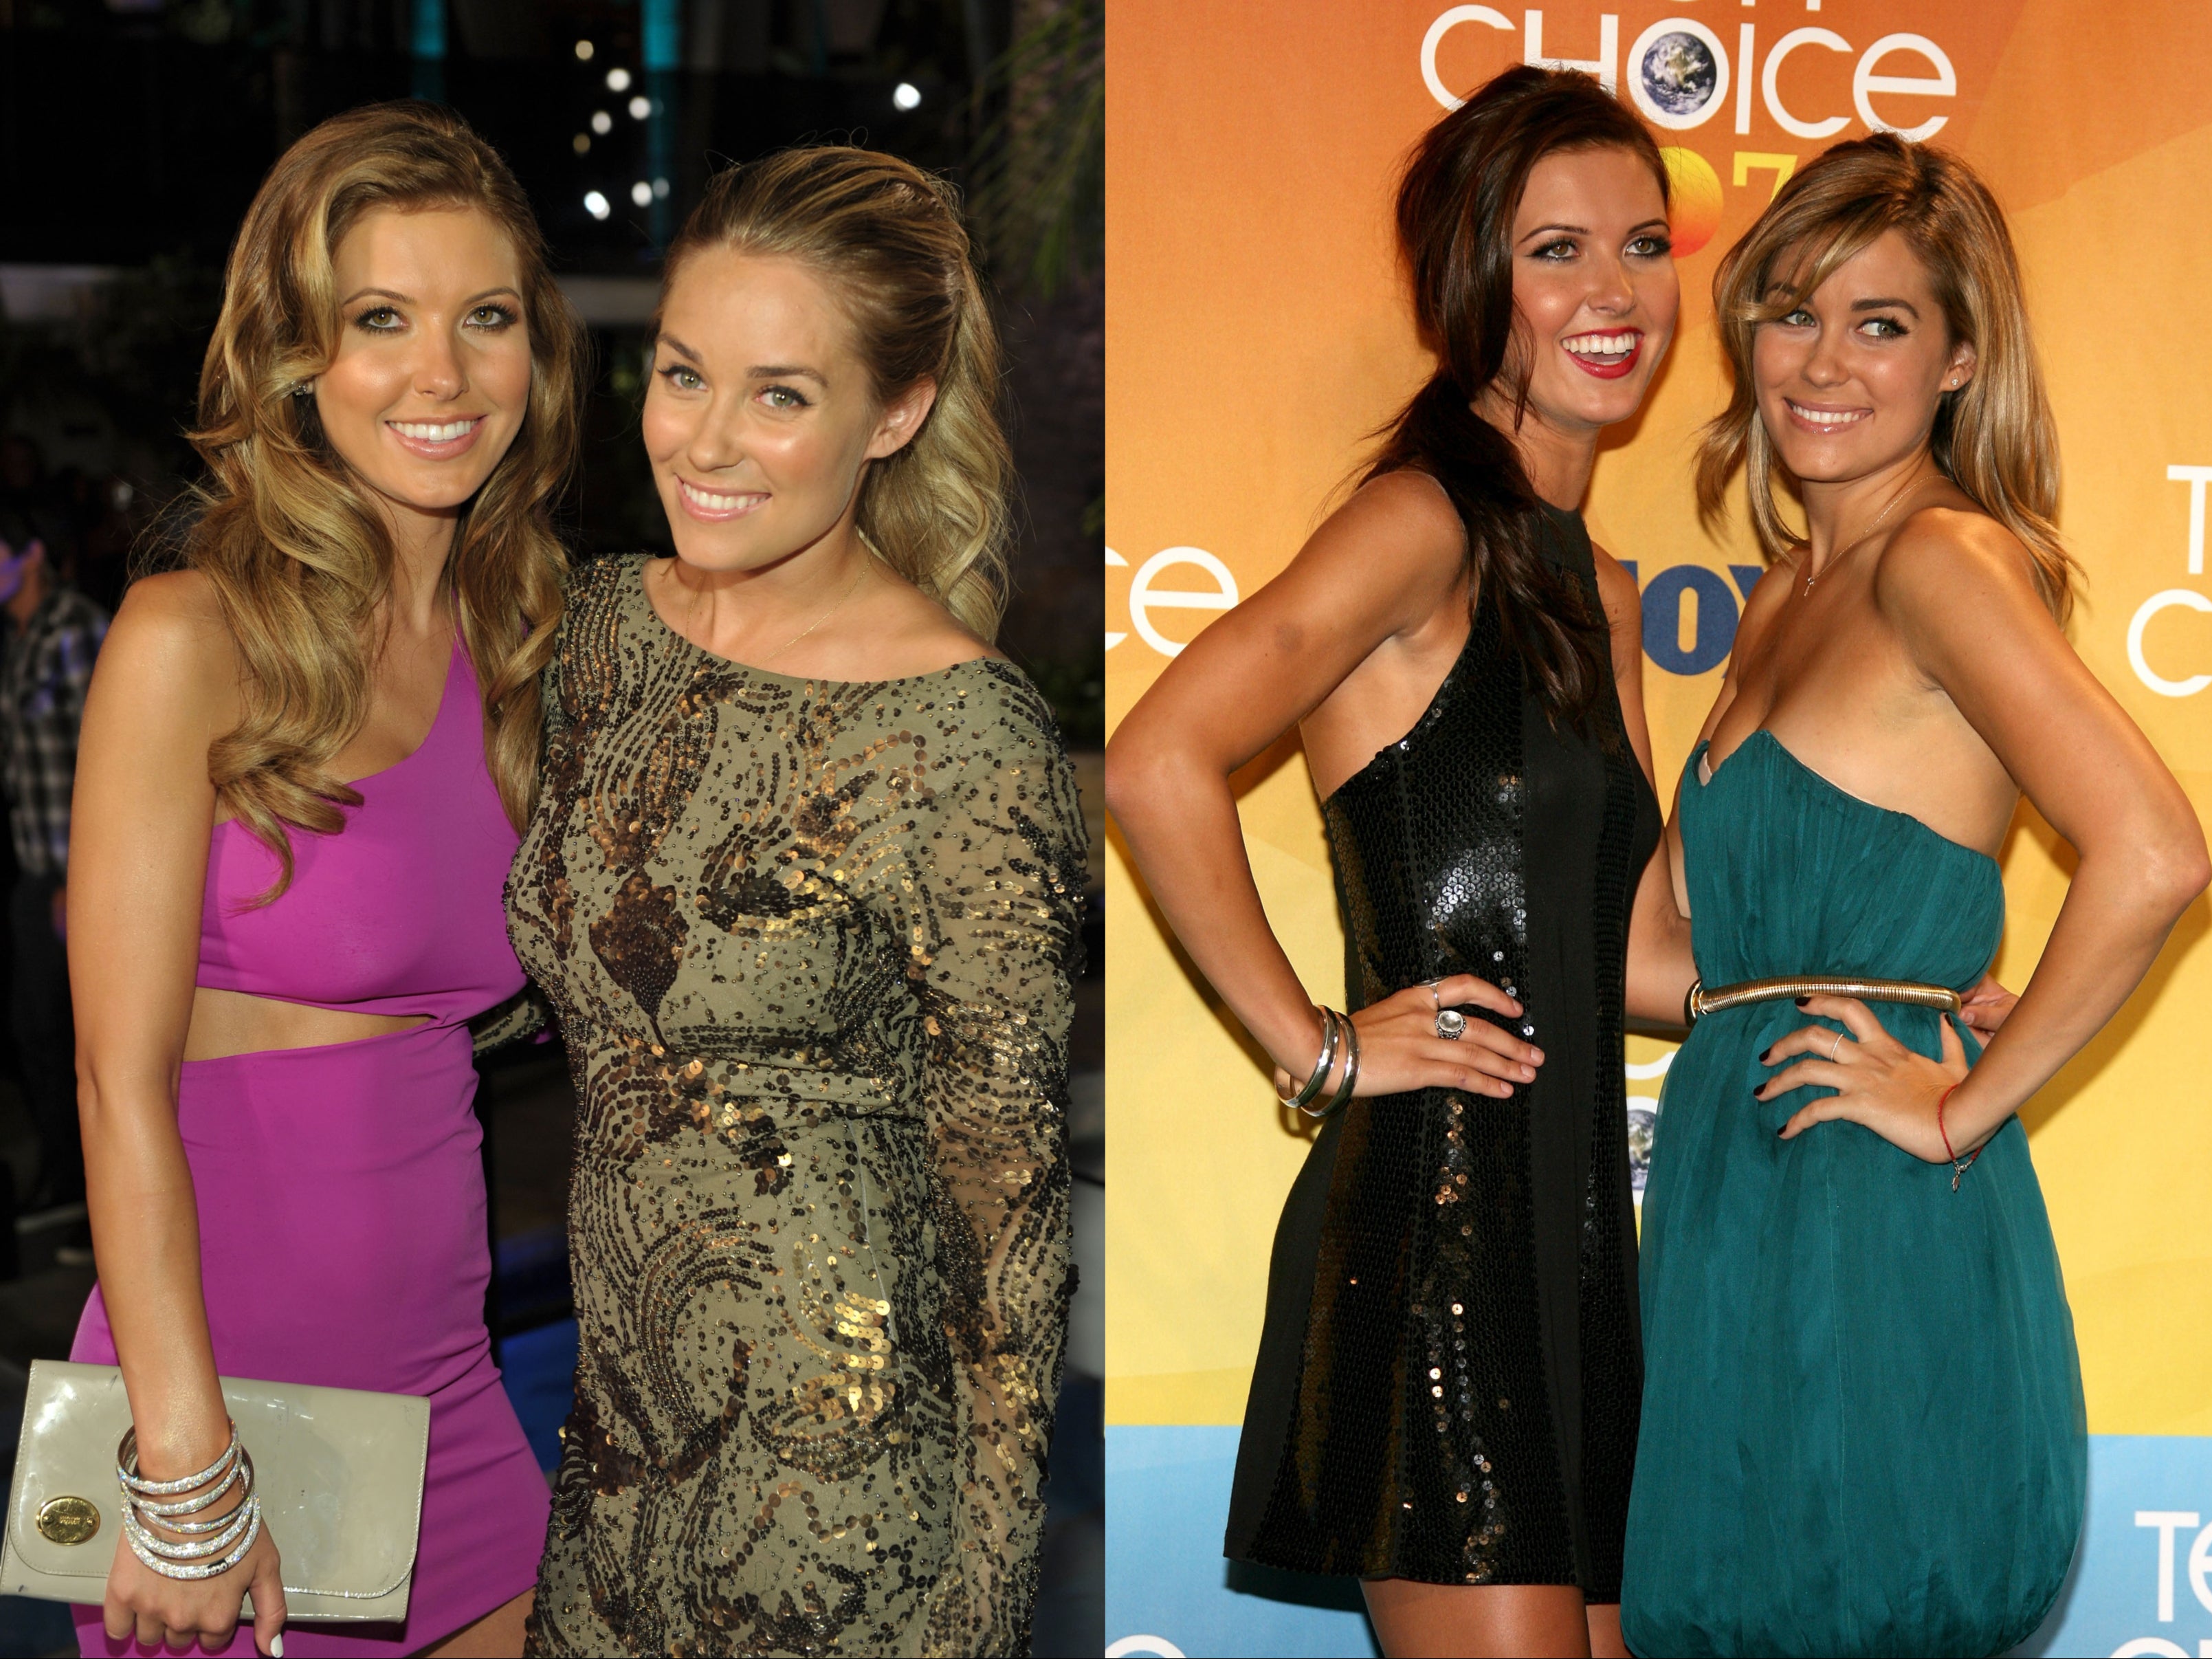 Lauren Conrad was 'controlling over her friends', Audrina Patridge claims